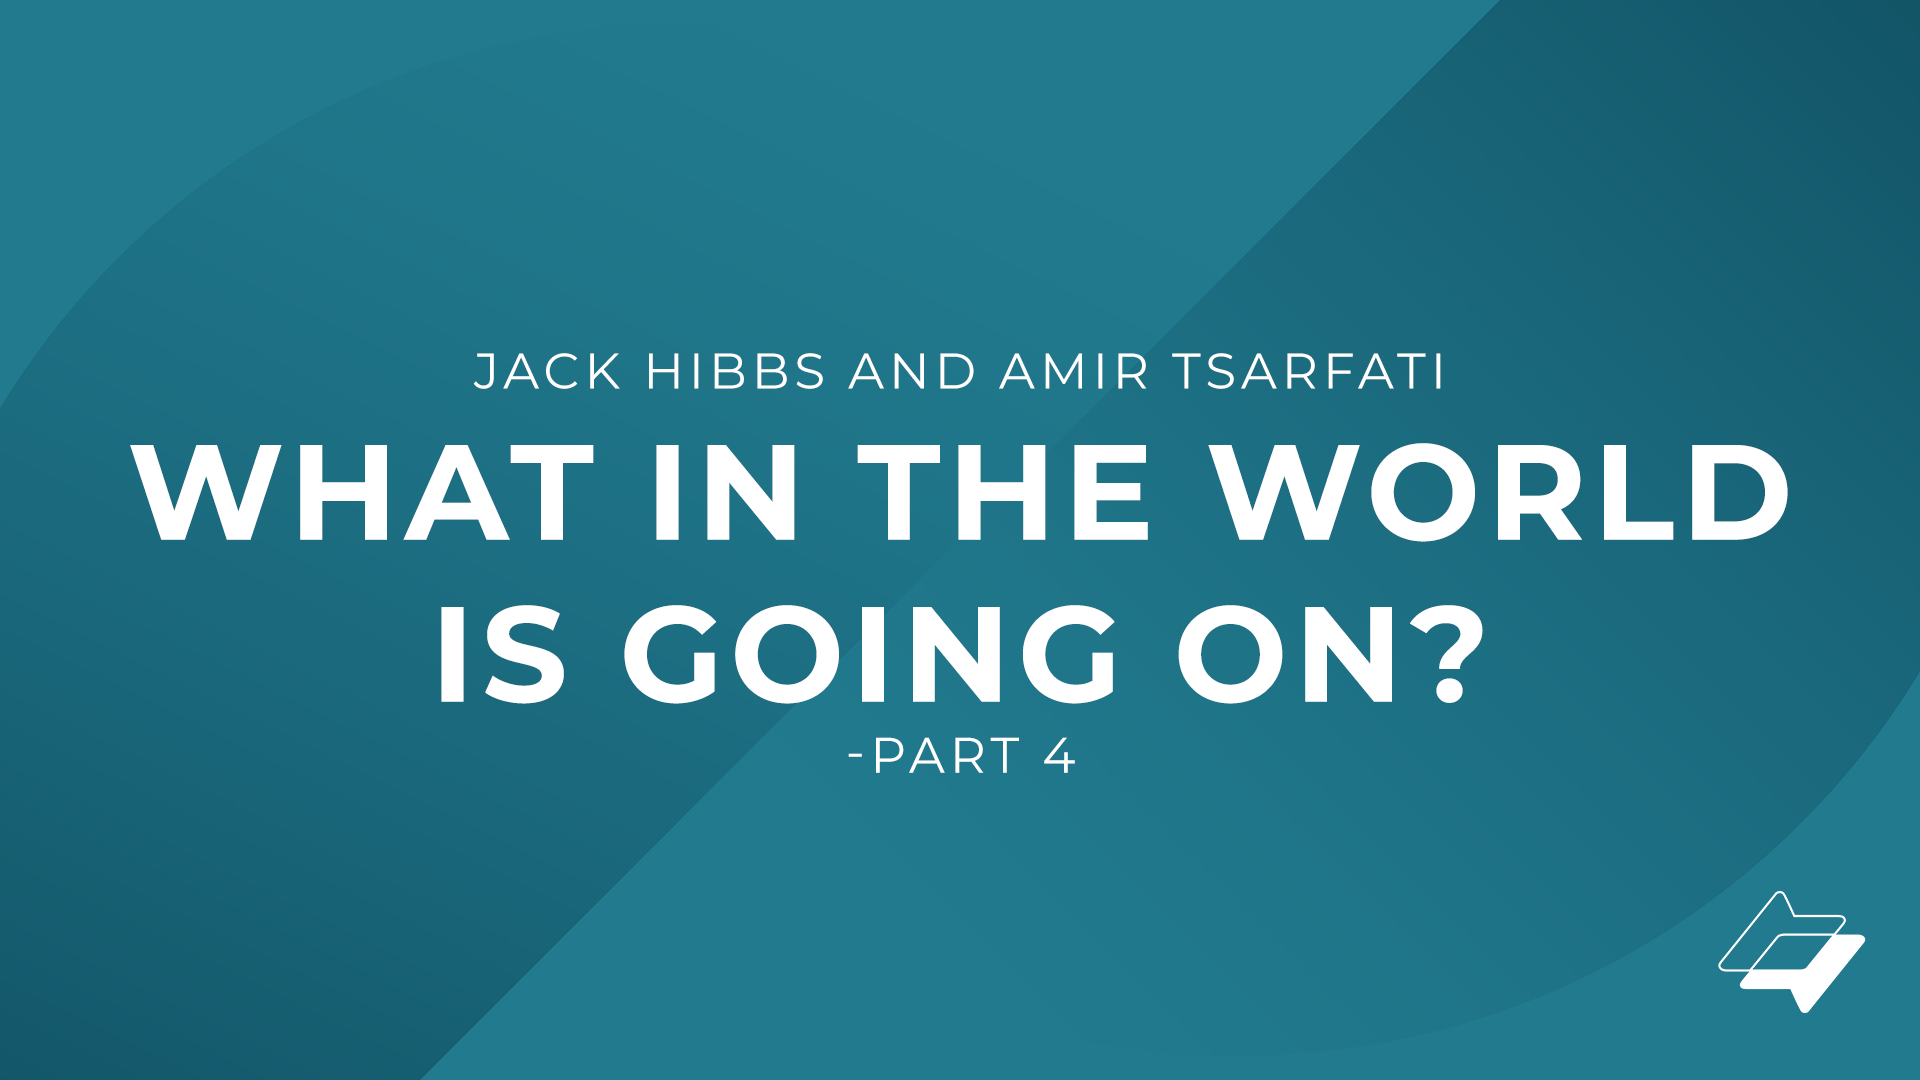 Jack Hibbs and Amir Tsarfati – What in the World is Going On? – Part 4